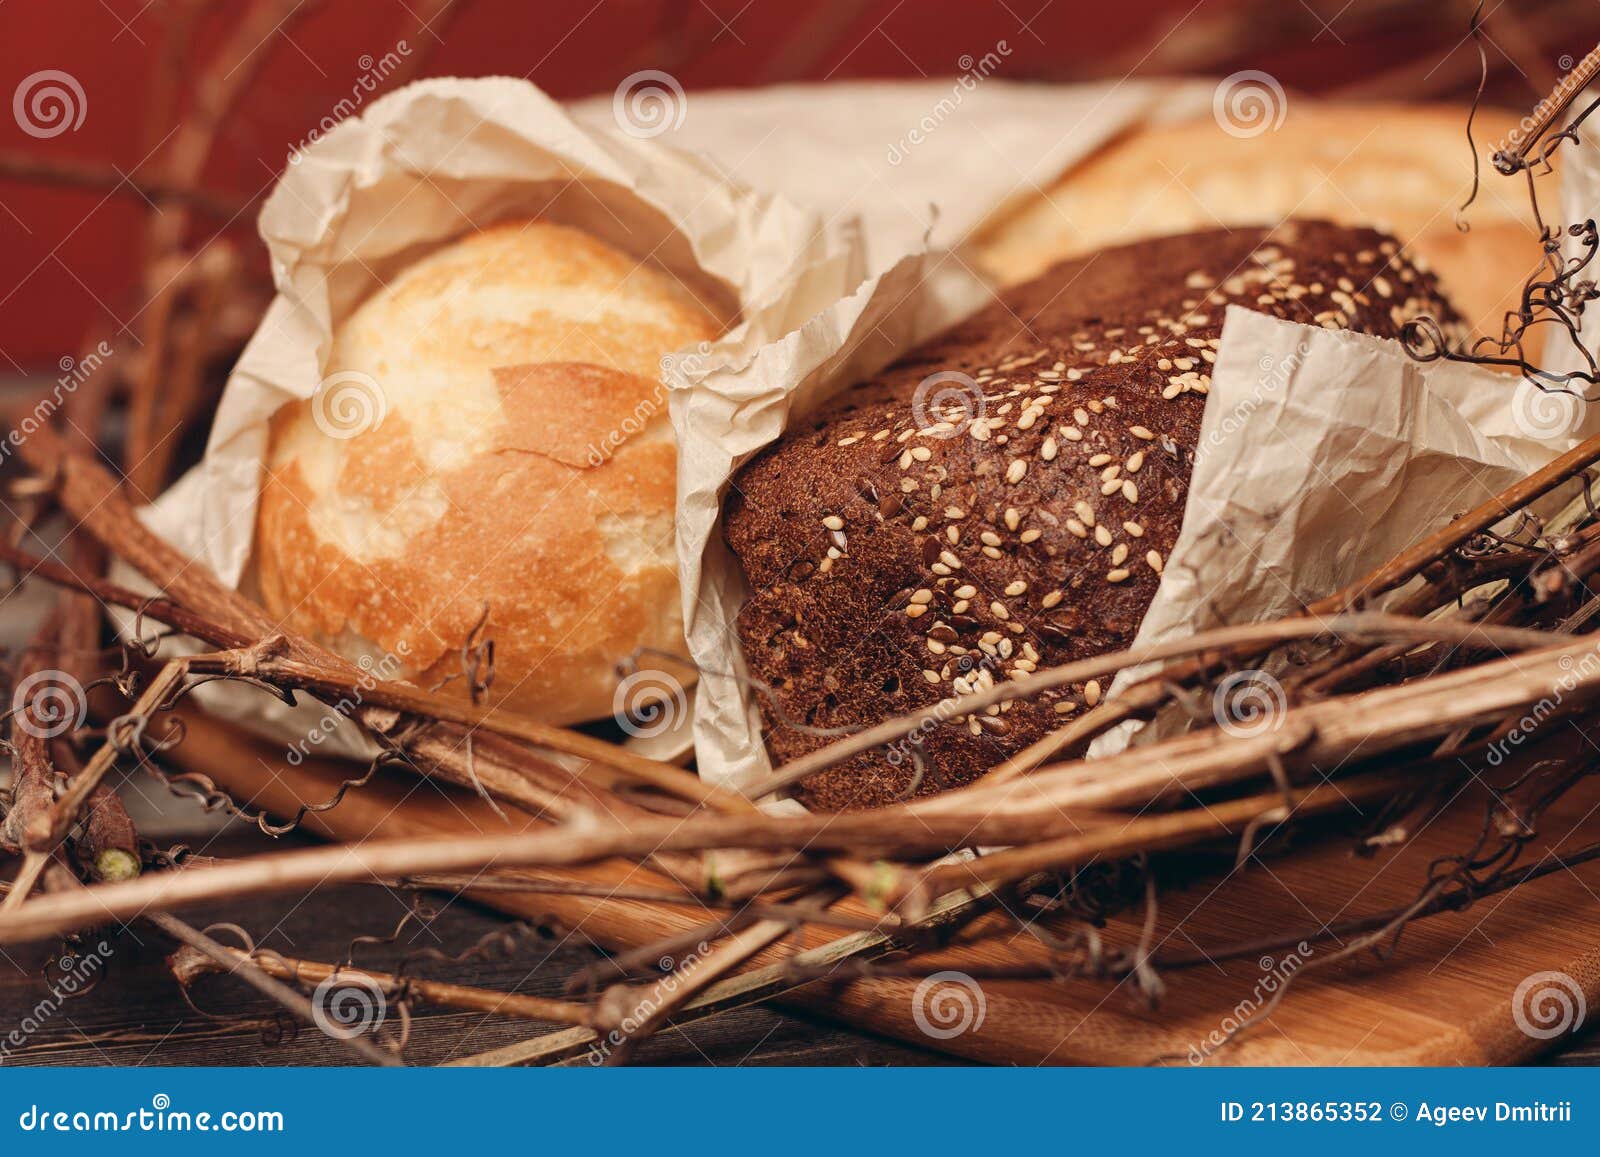 Flour Product Loaf of Bread Baked Goods on the Branches of the